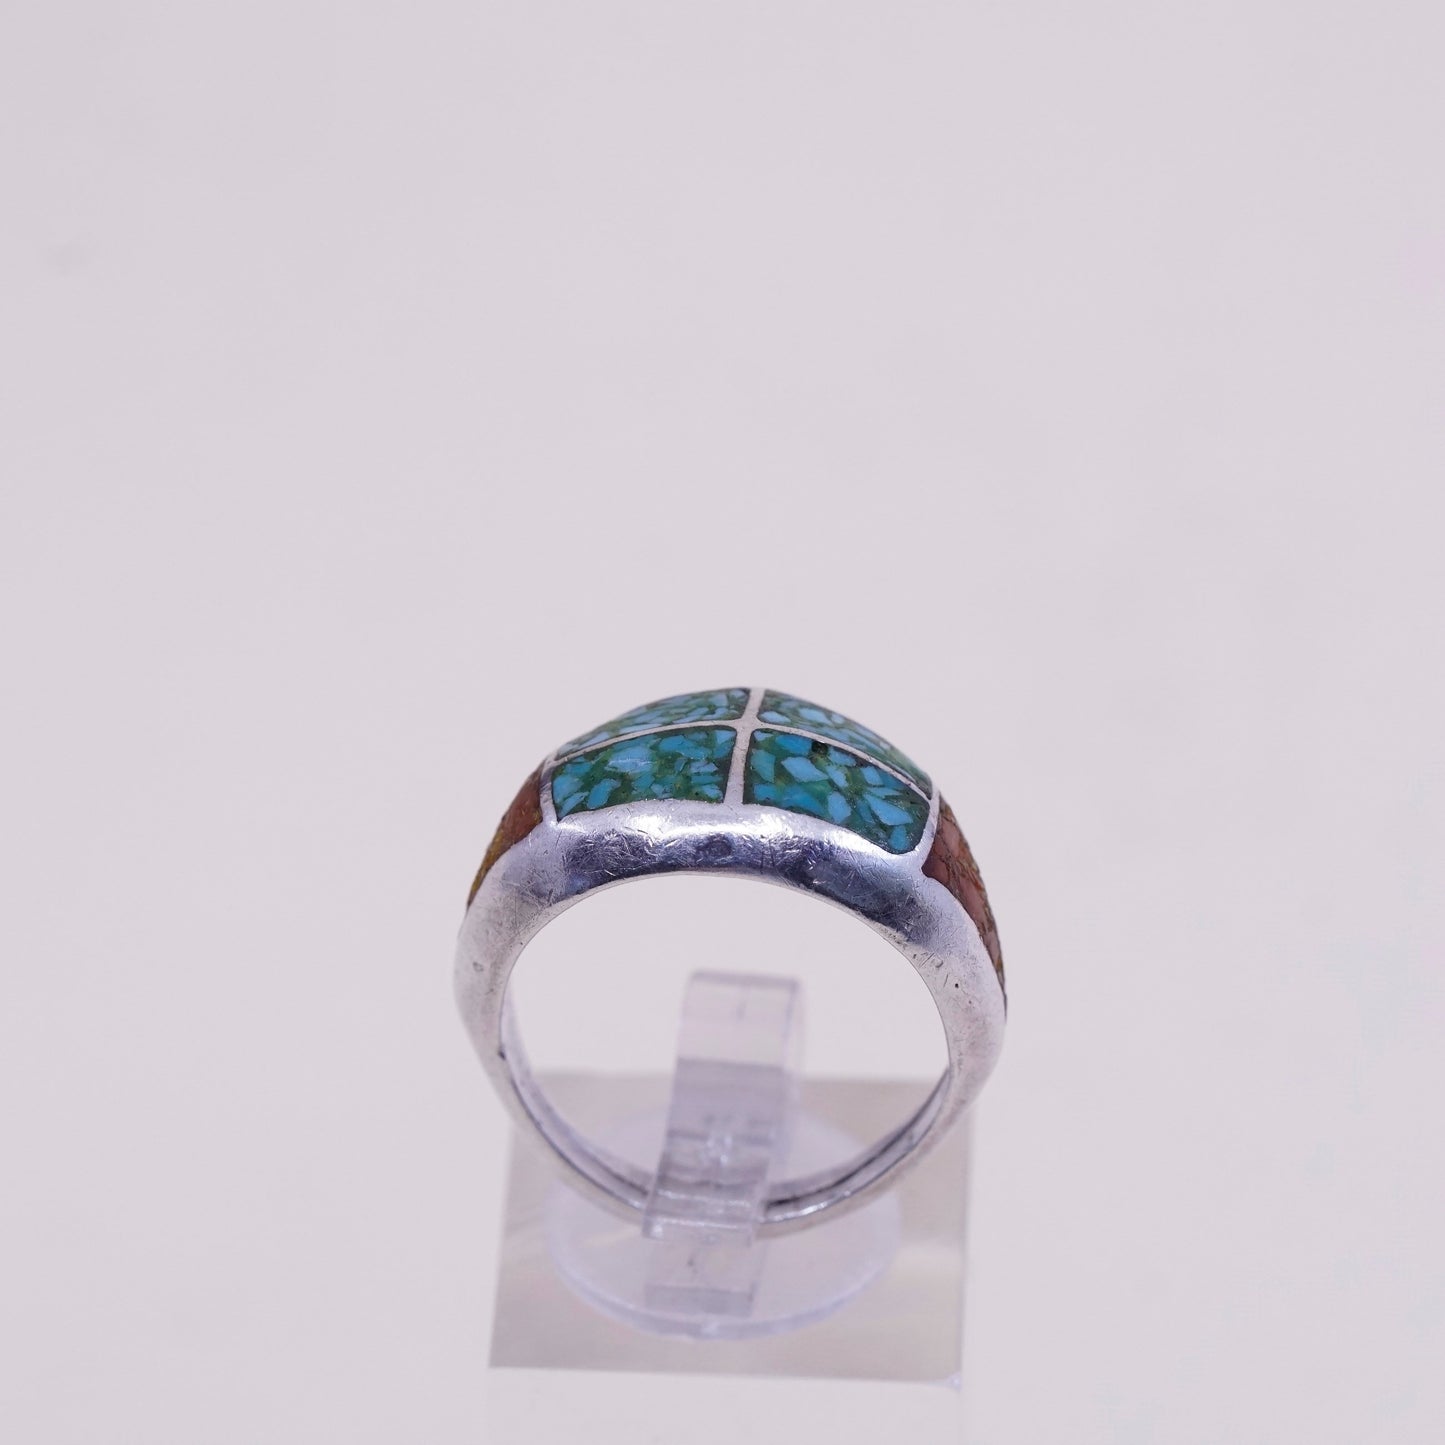 sz 9, natives American Sterling 925 silver handmade ring w/ turquoise N coral